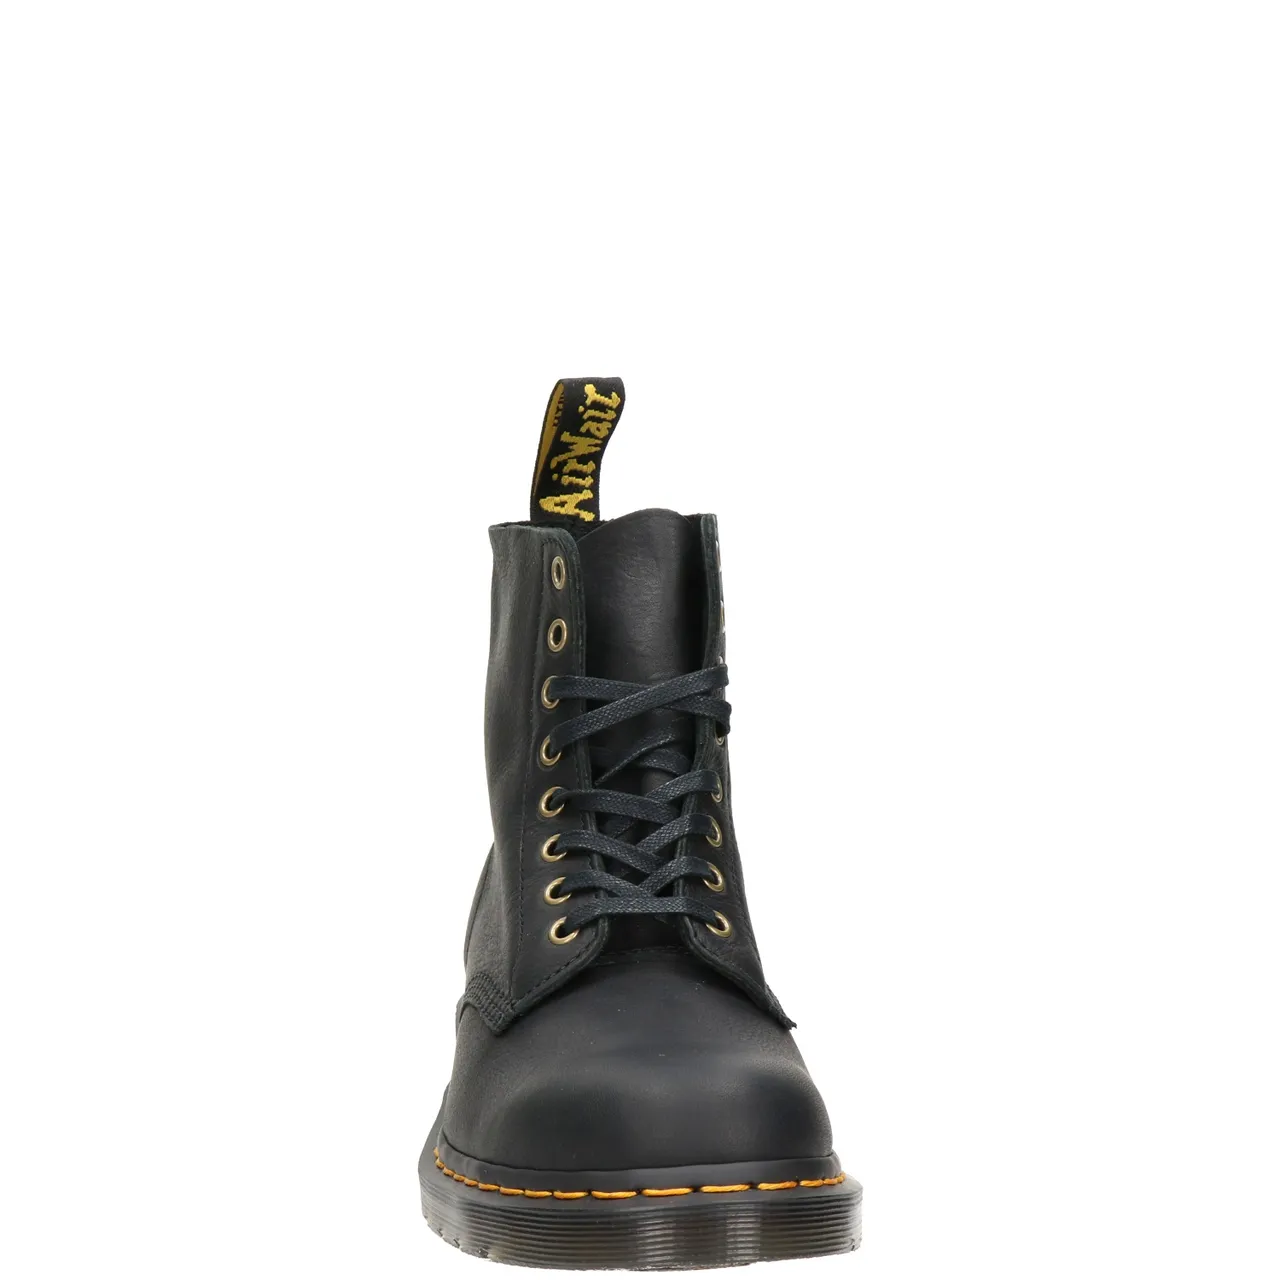 Dr. Martens 1460 Pascal veterboots